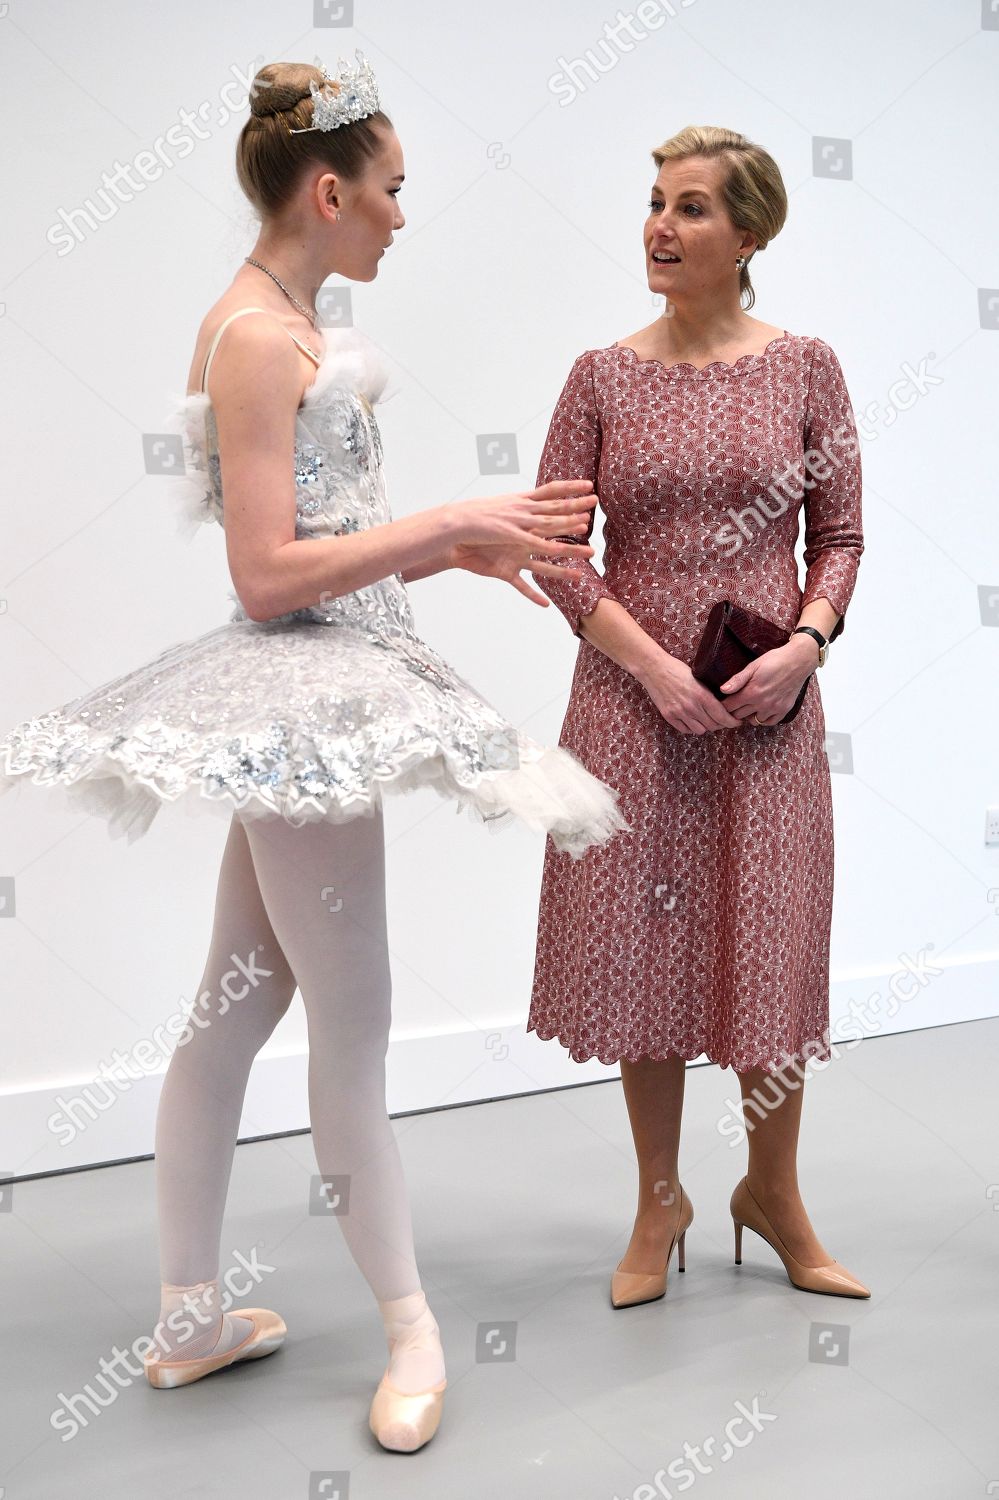 sophie-countess-of-wessex-opens-a-new-studio-for-central-school-of-ballet-london-uk-shutterstock-editorial-10568616o.jpg